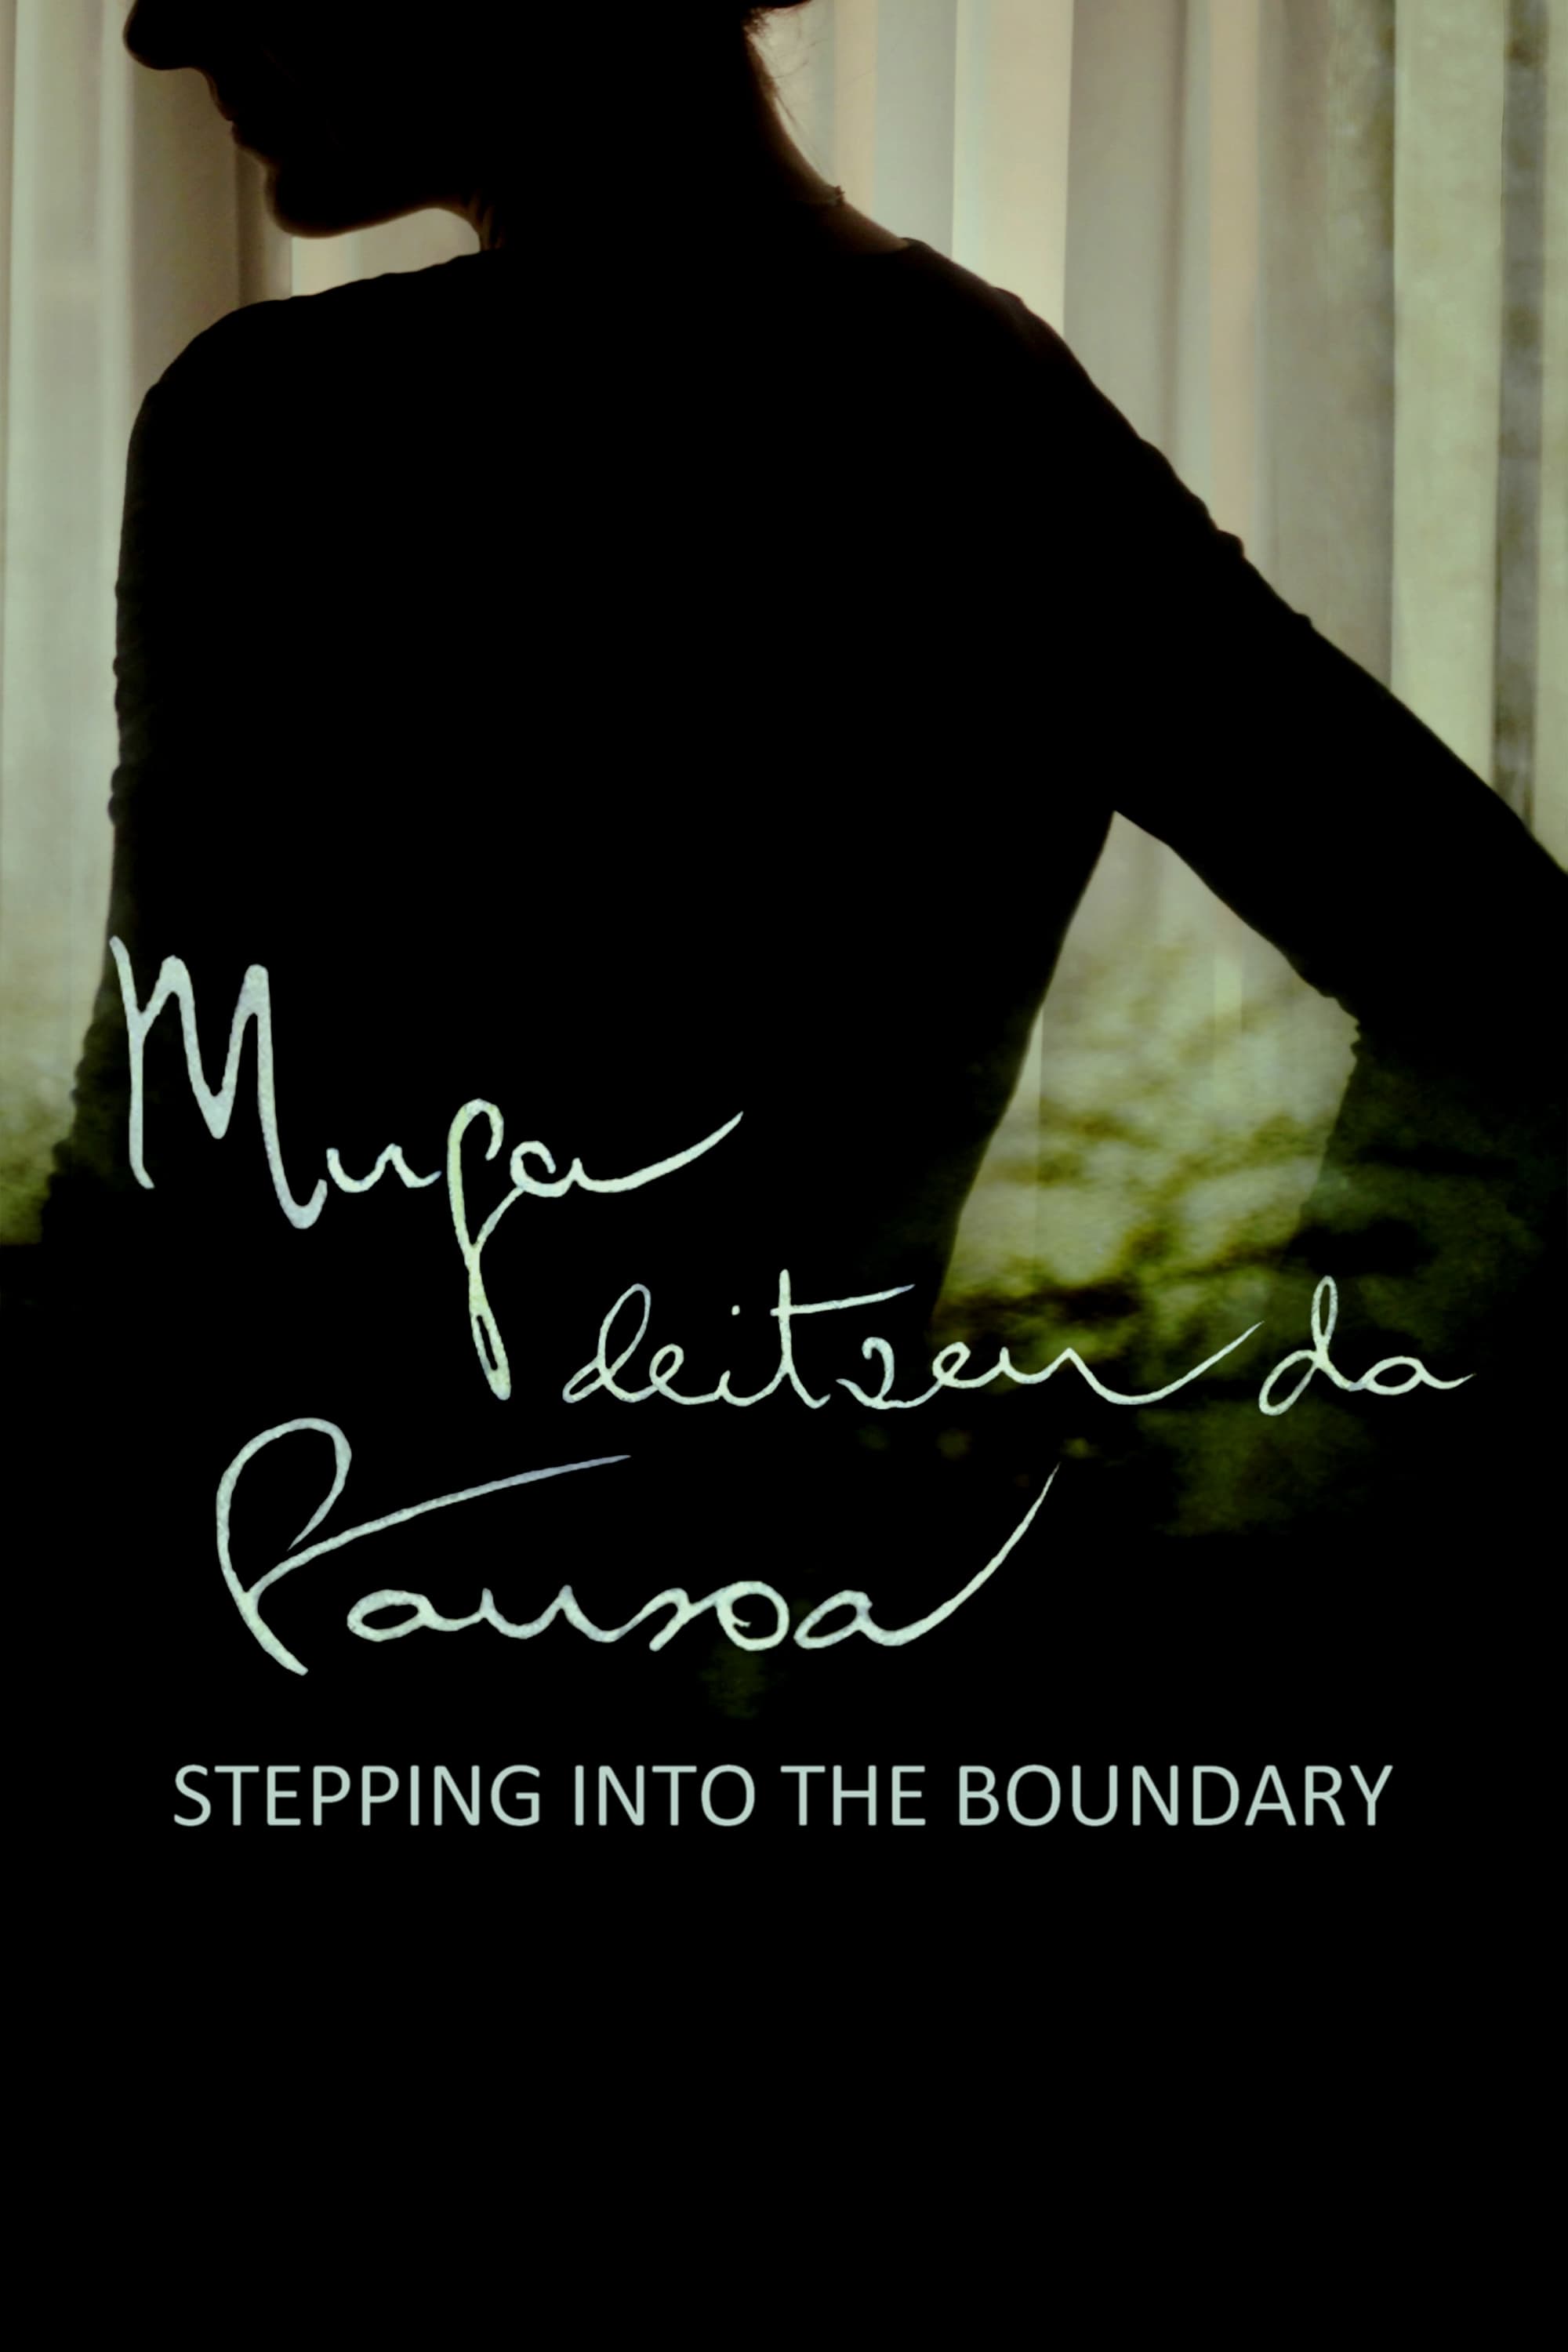 Stepping Into the Boundary